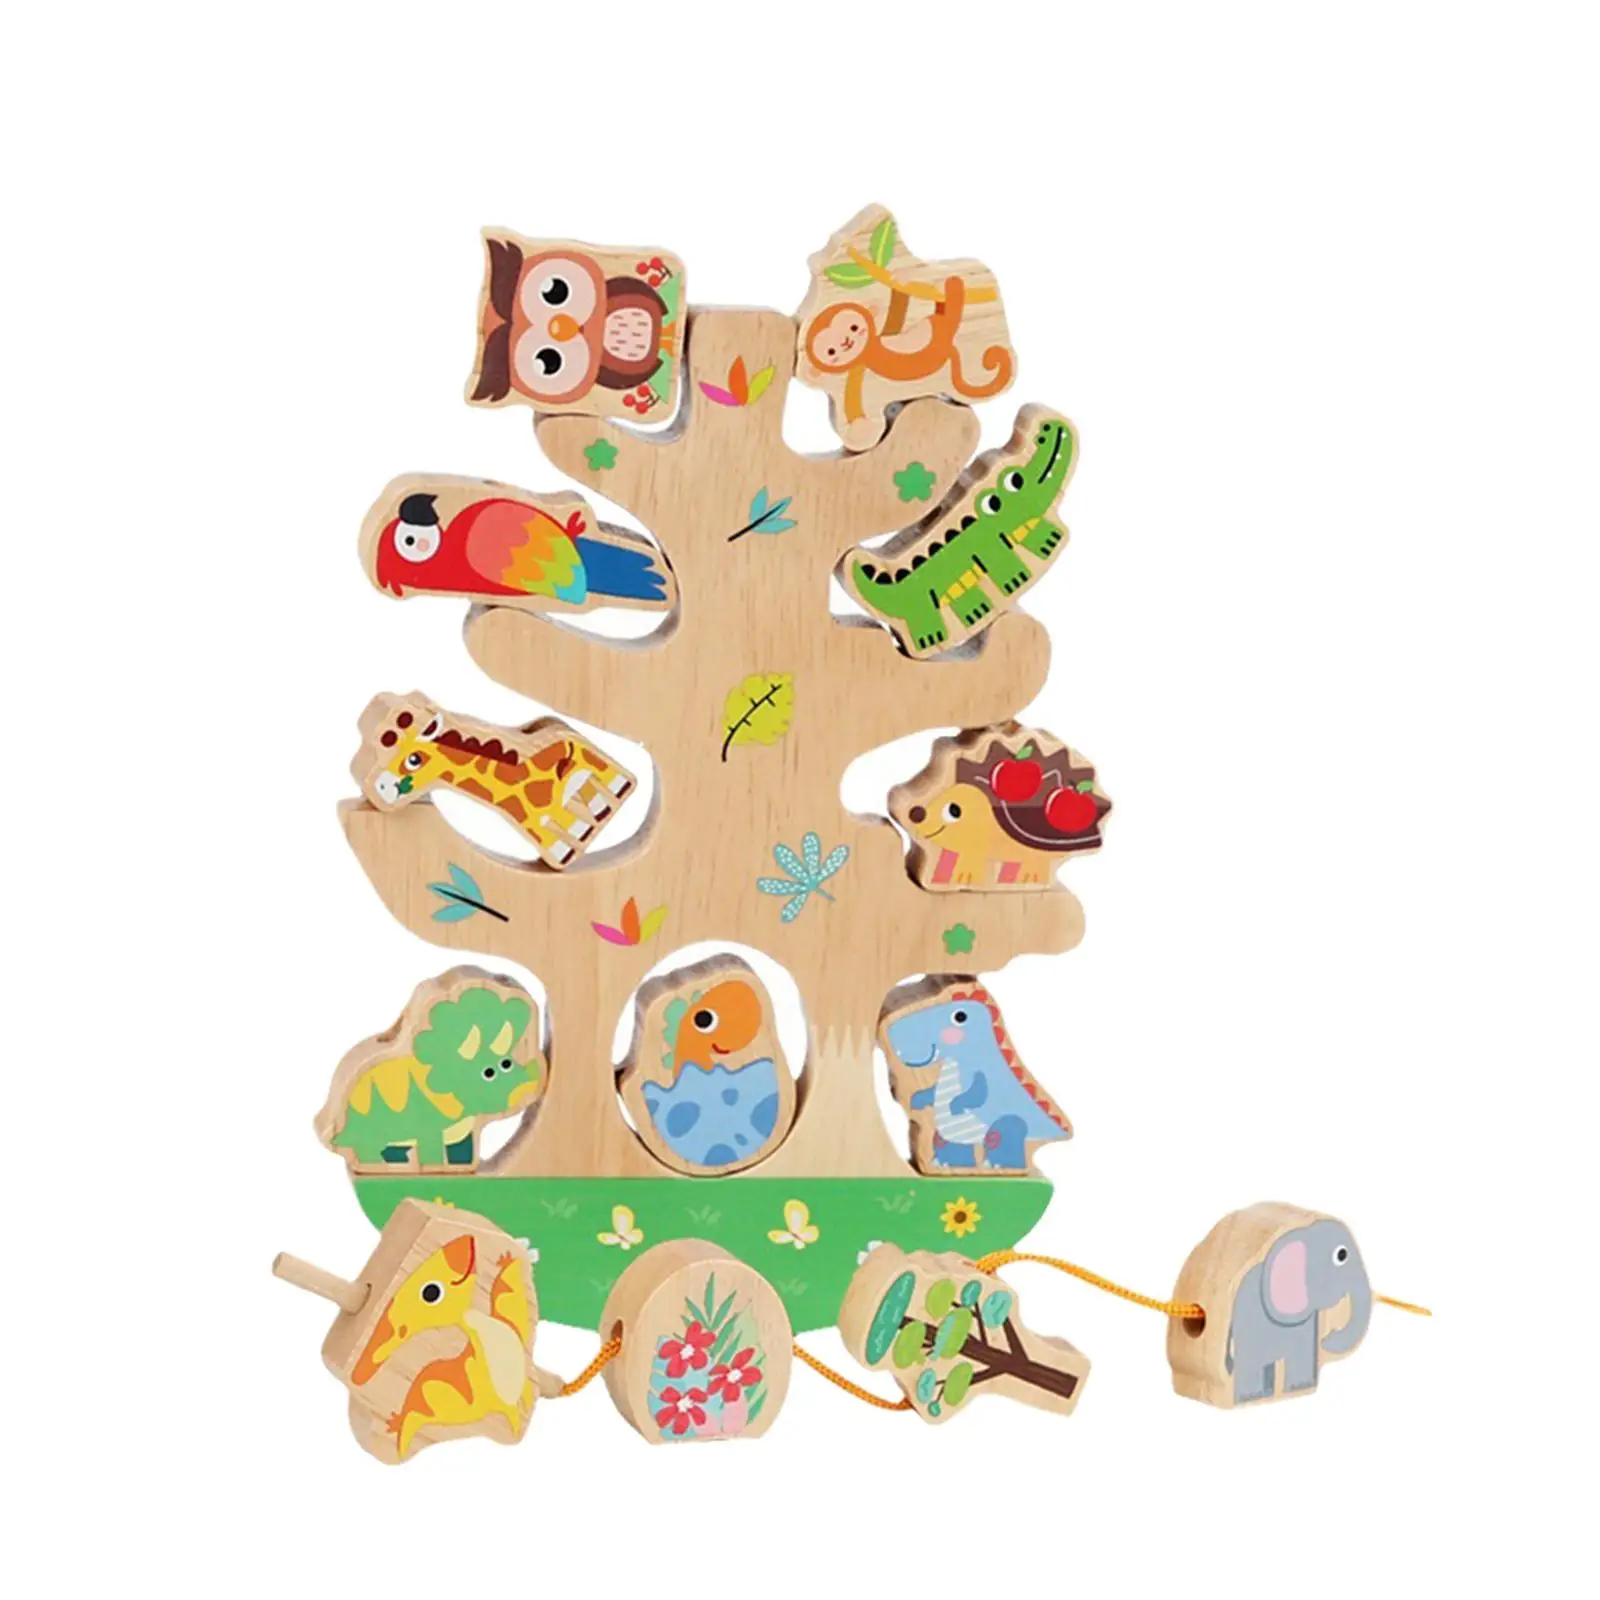 Wooden Animal Stacking Toys Puzzle Early Learning Gifts Threading Toys for Festival Birthday New Year Kids Children Preschool